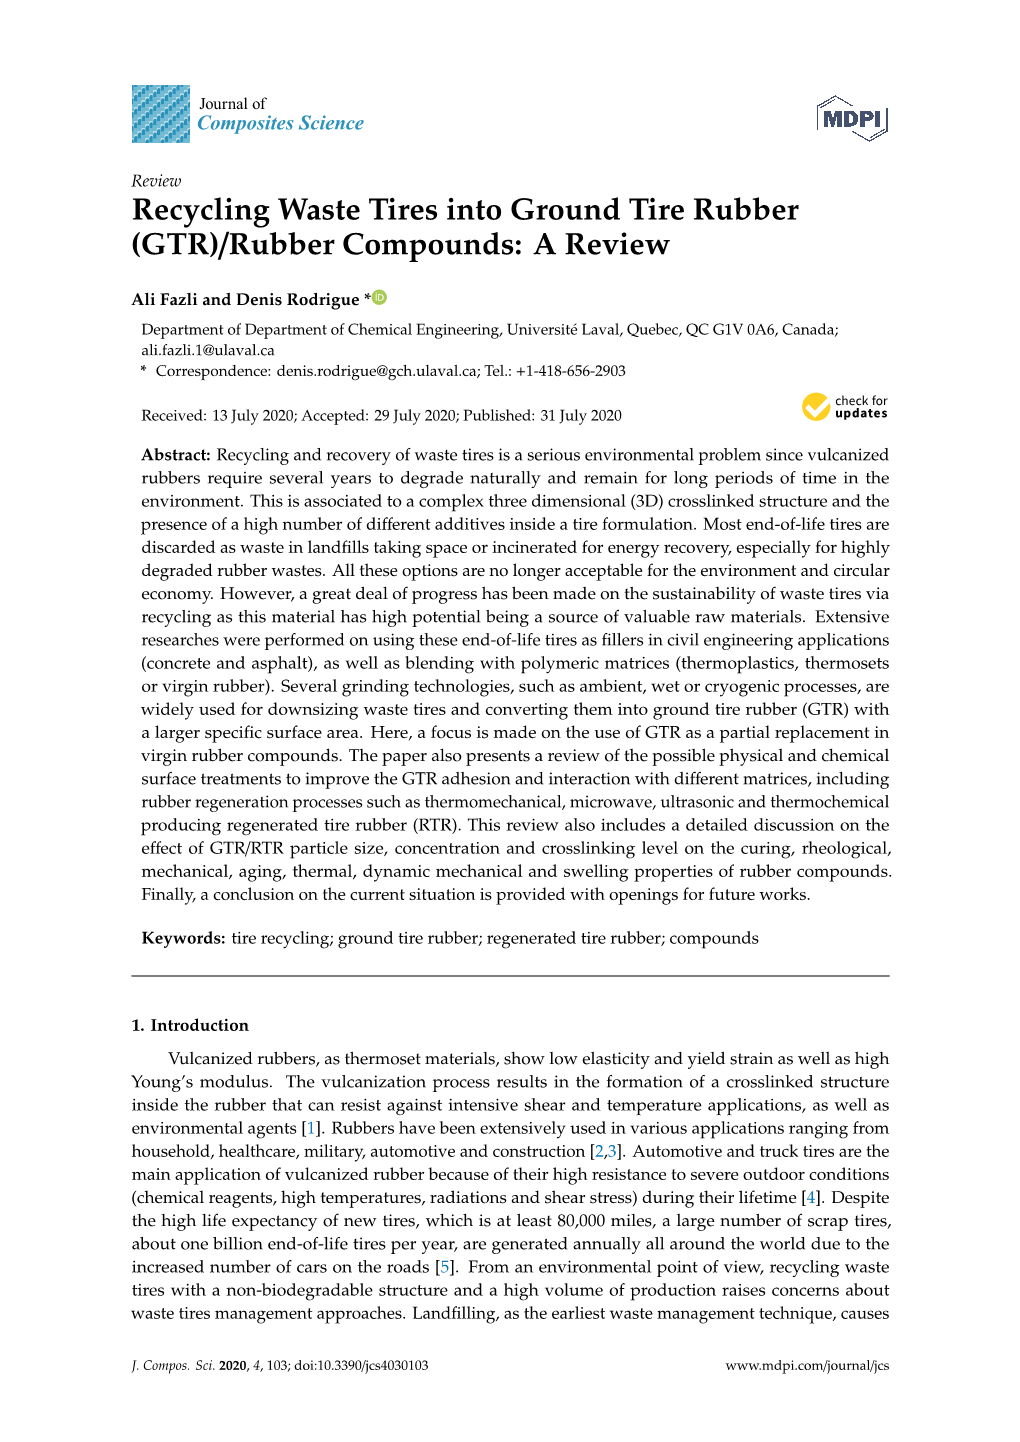 Recycling Waste Tires Into Ground Tire Rubber (GTR)/Rubber Compounds: a Review